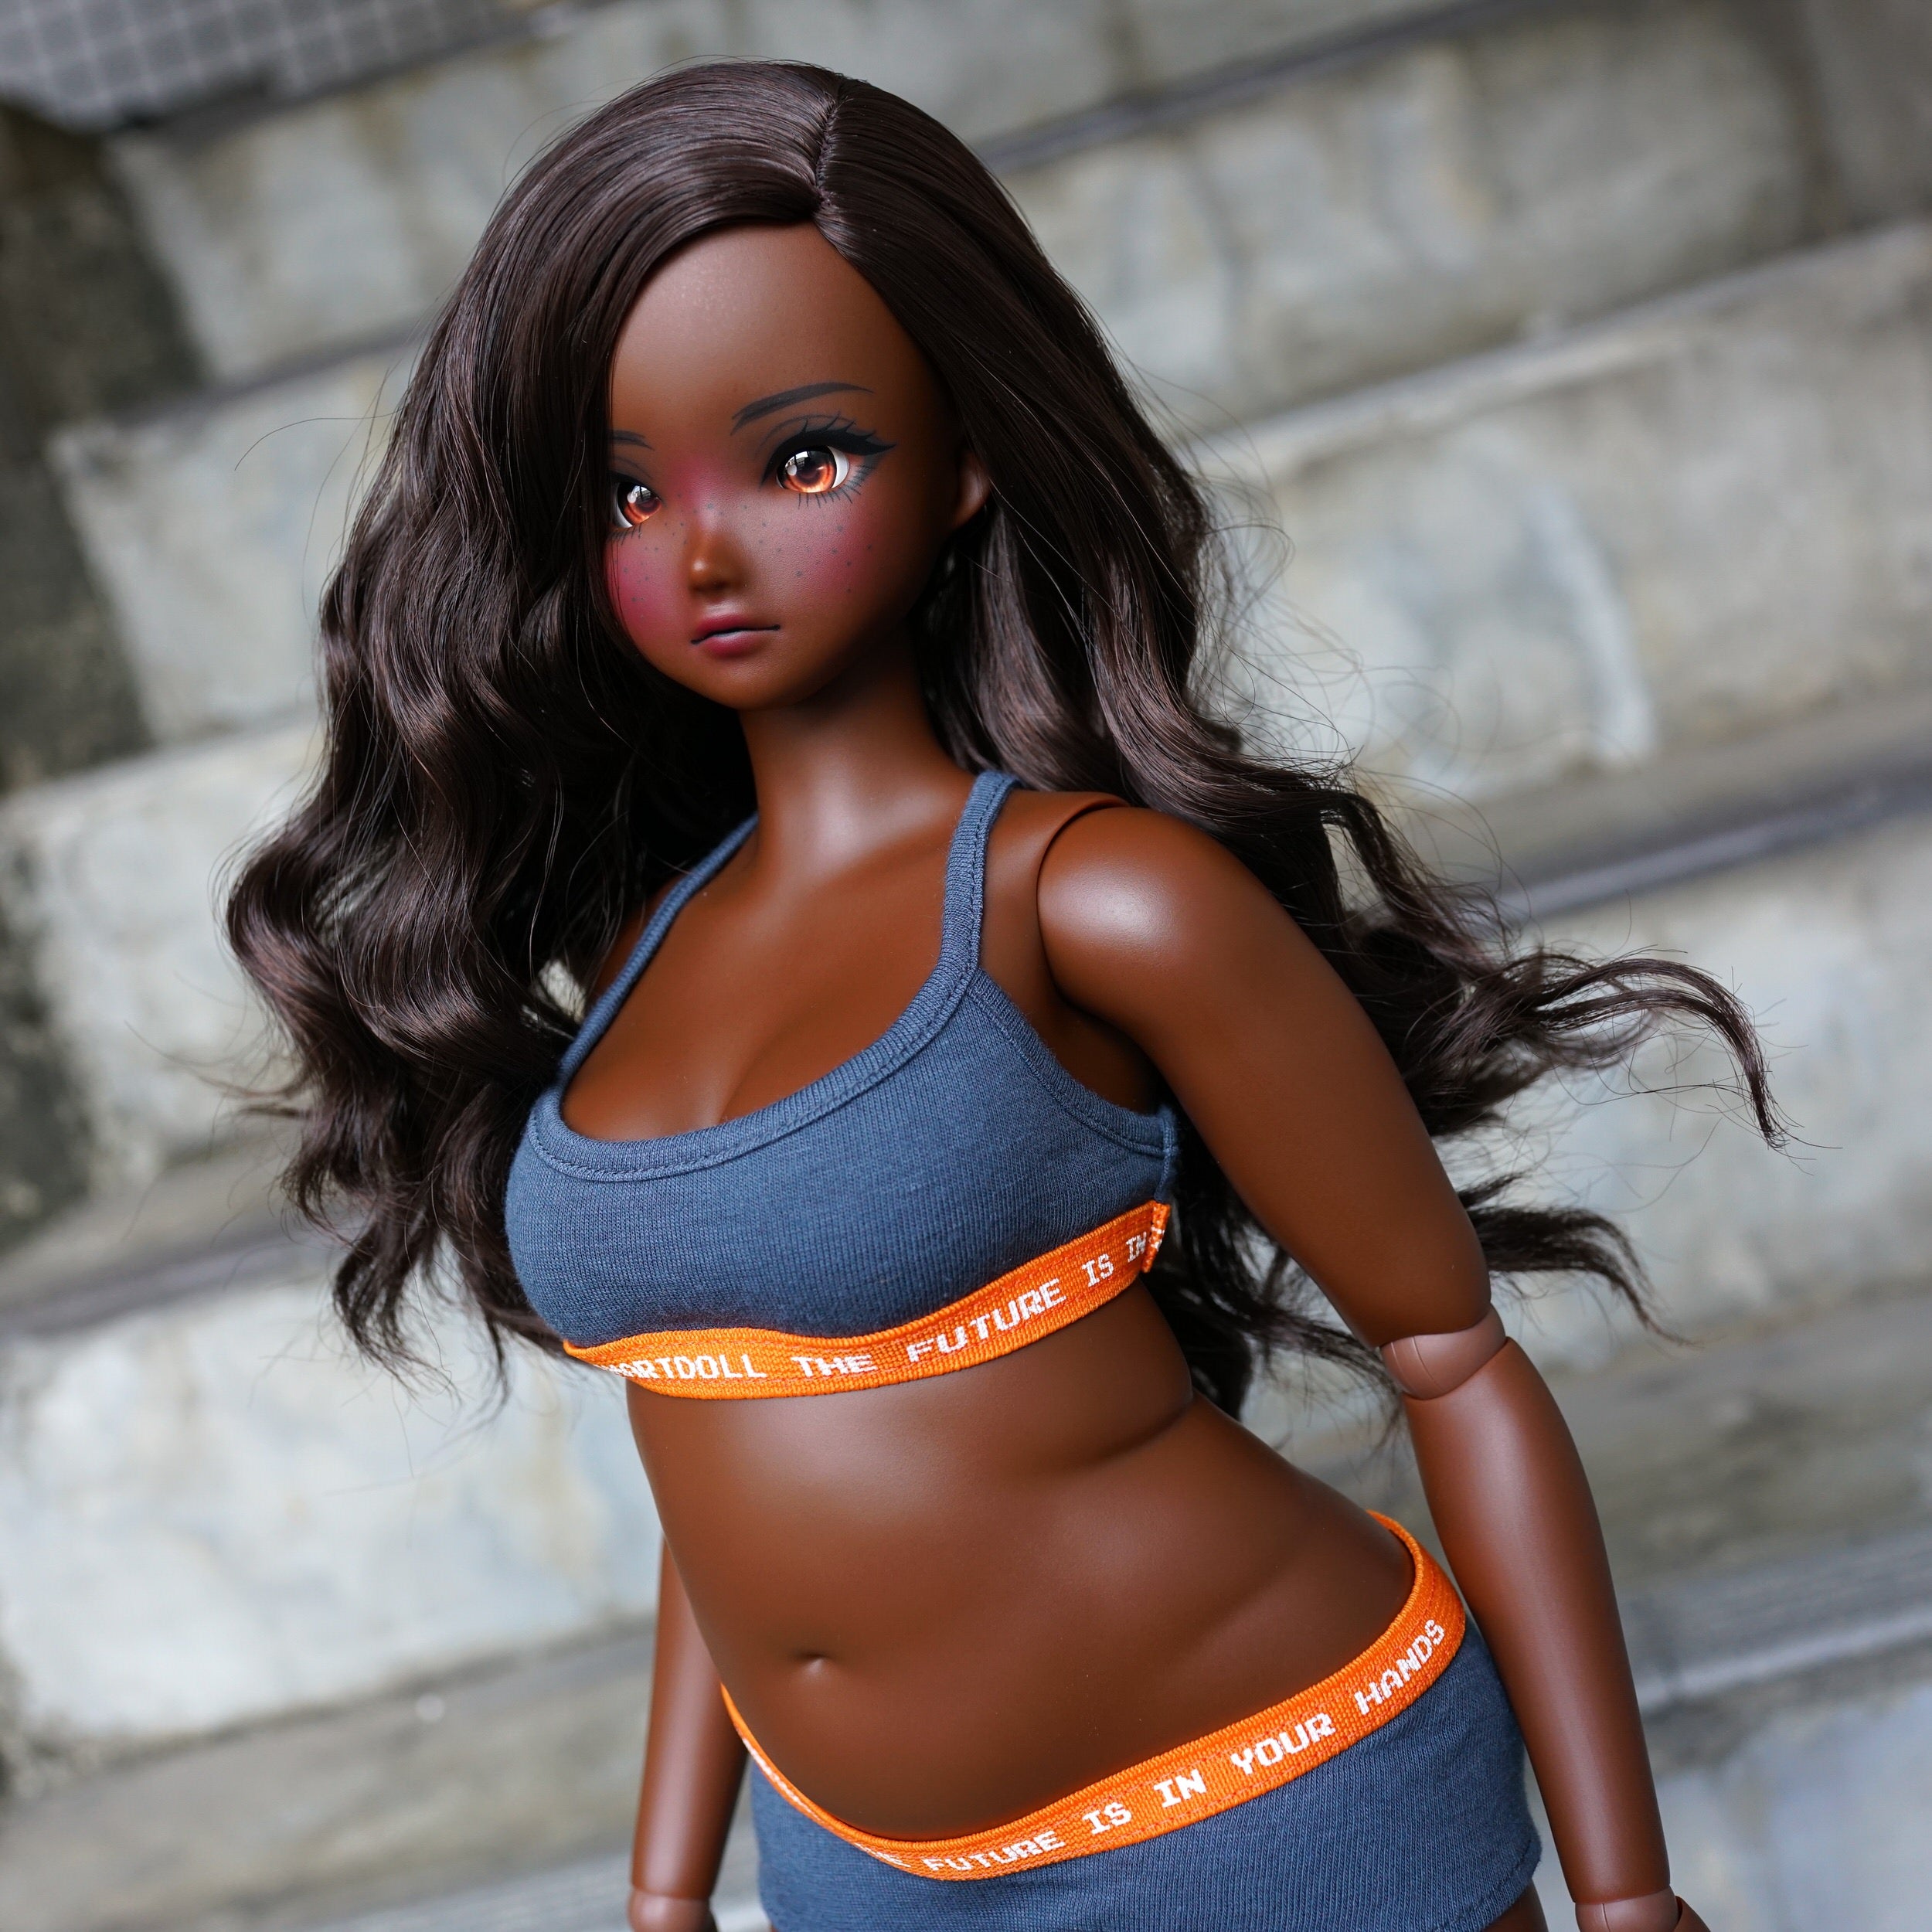 Smart Doll - Live and Let Live (Cocoa) – Smart Doll Store